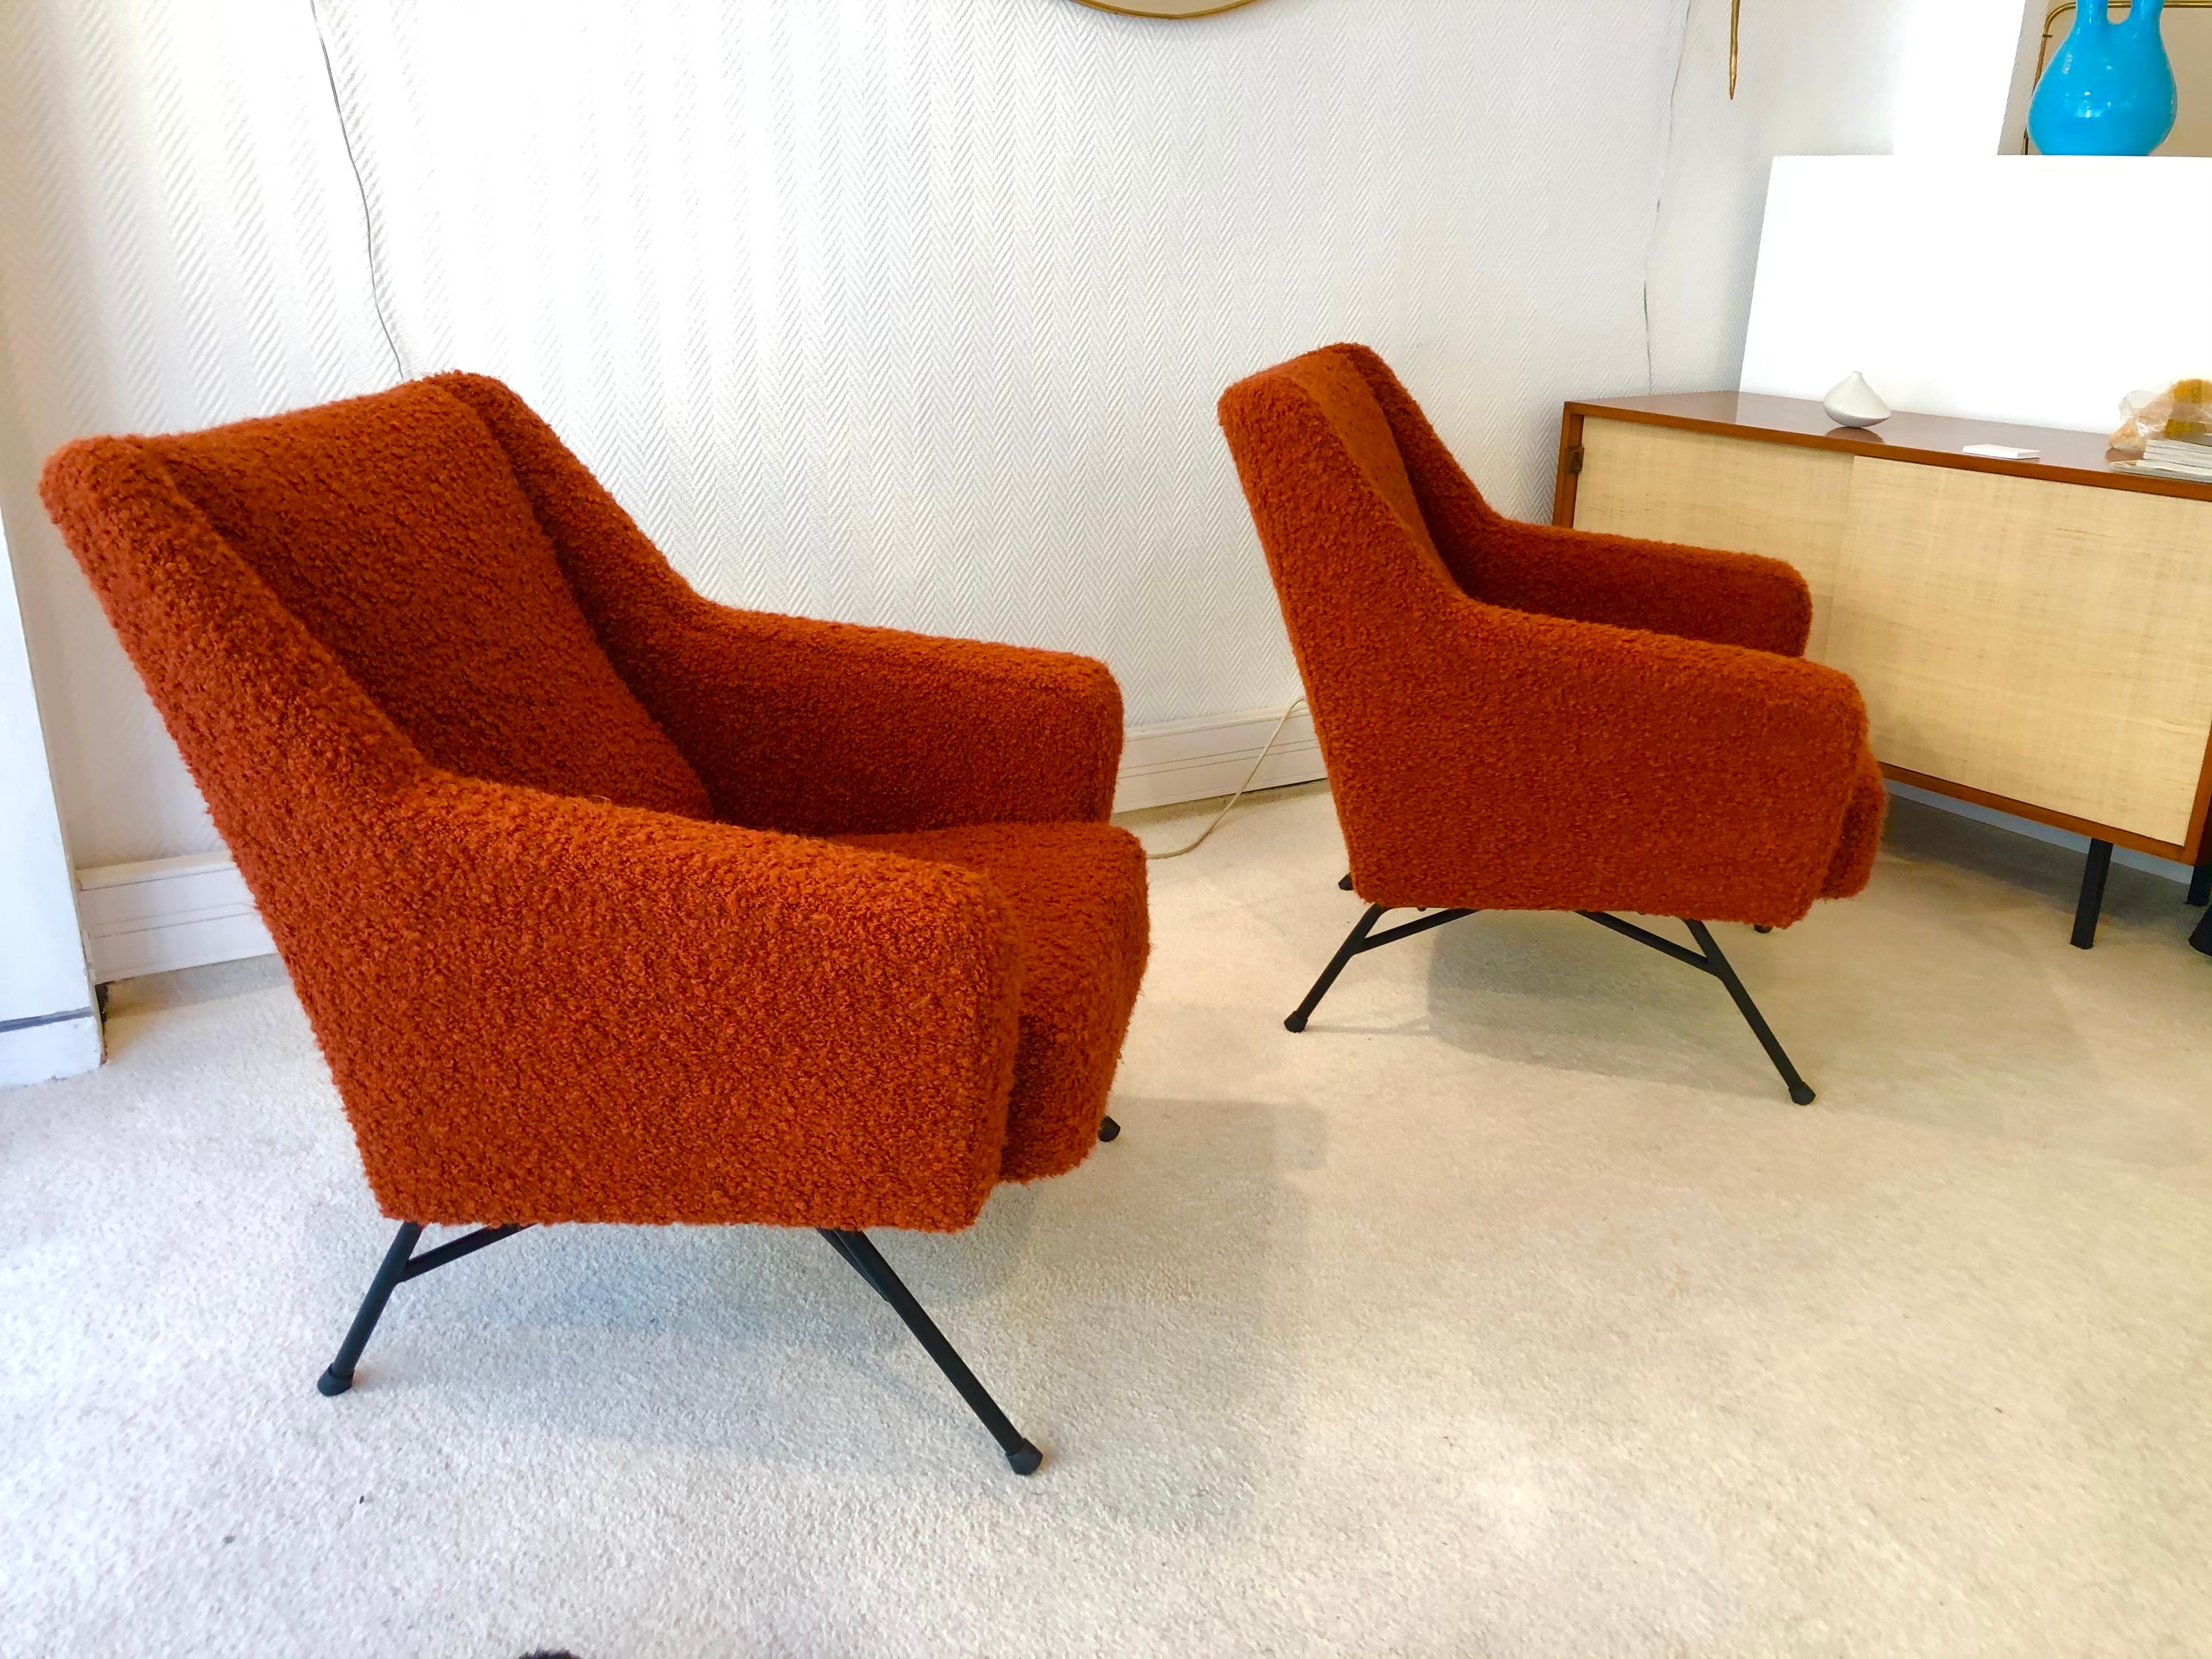 Mid-Century Modern Pair of Armchairs by Dangles et Defrance 1950